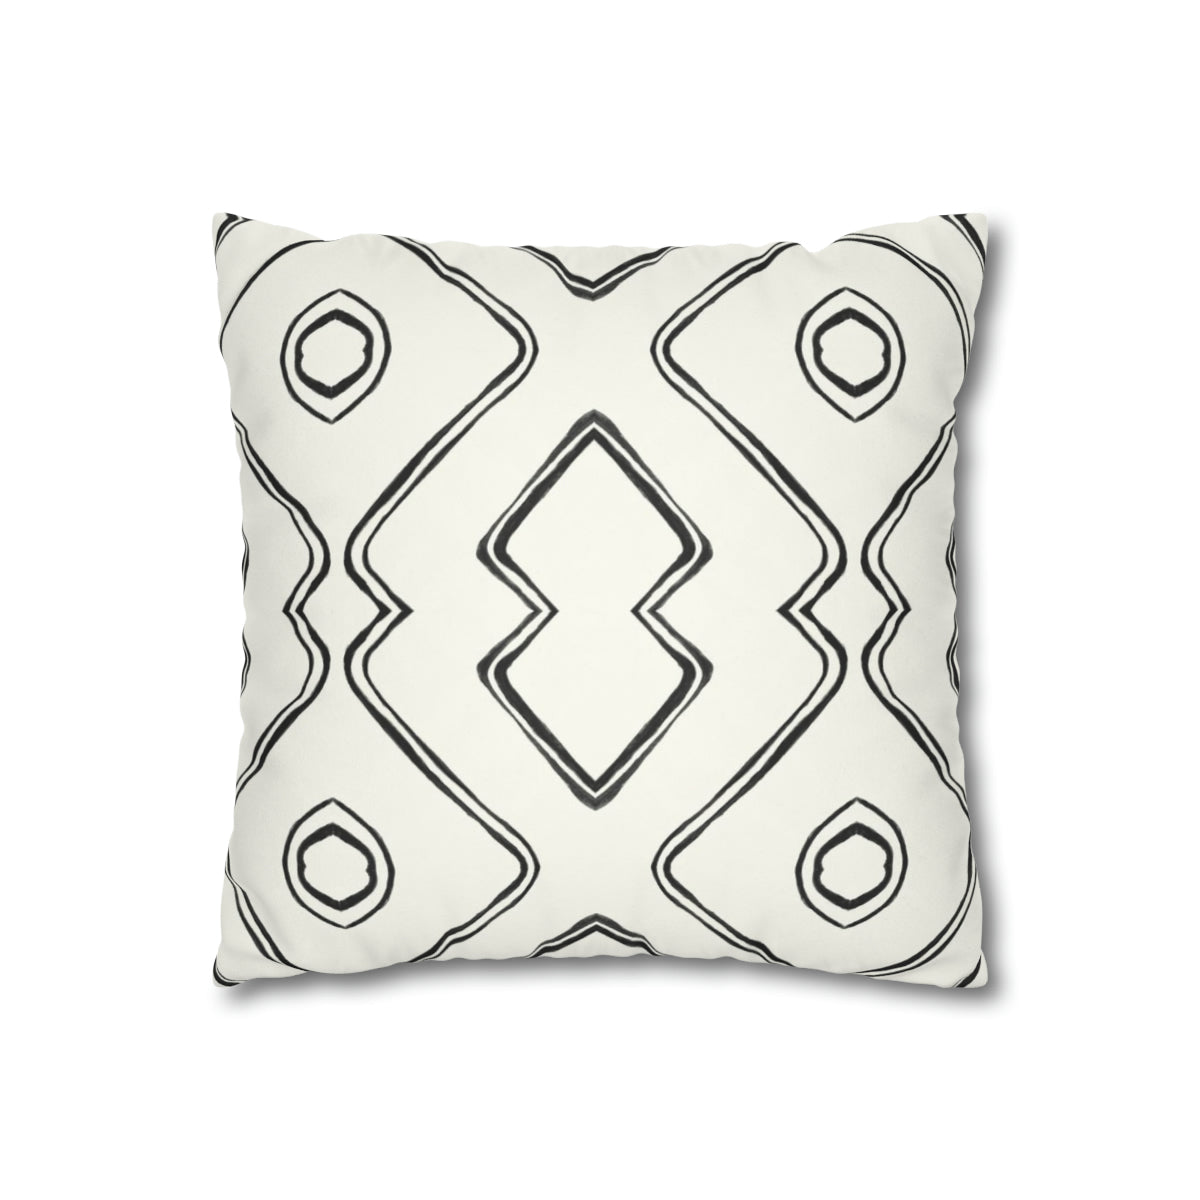 Harlow Microsuede Square Pillow Cover